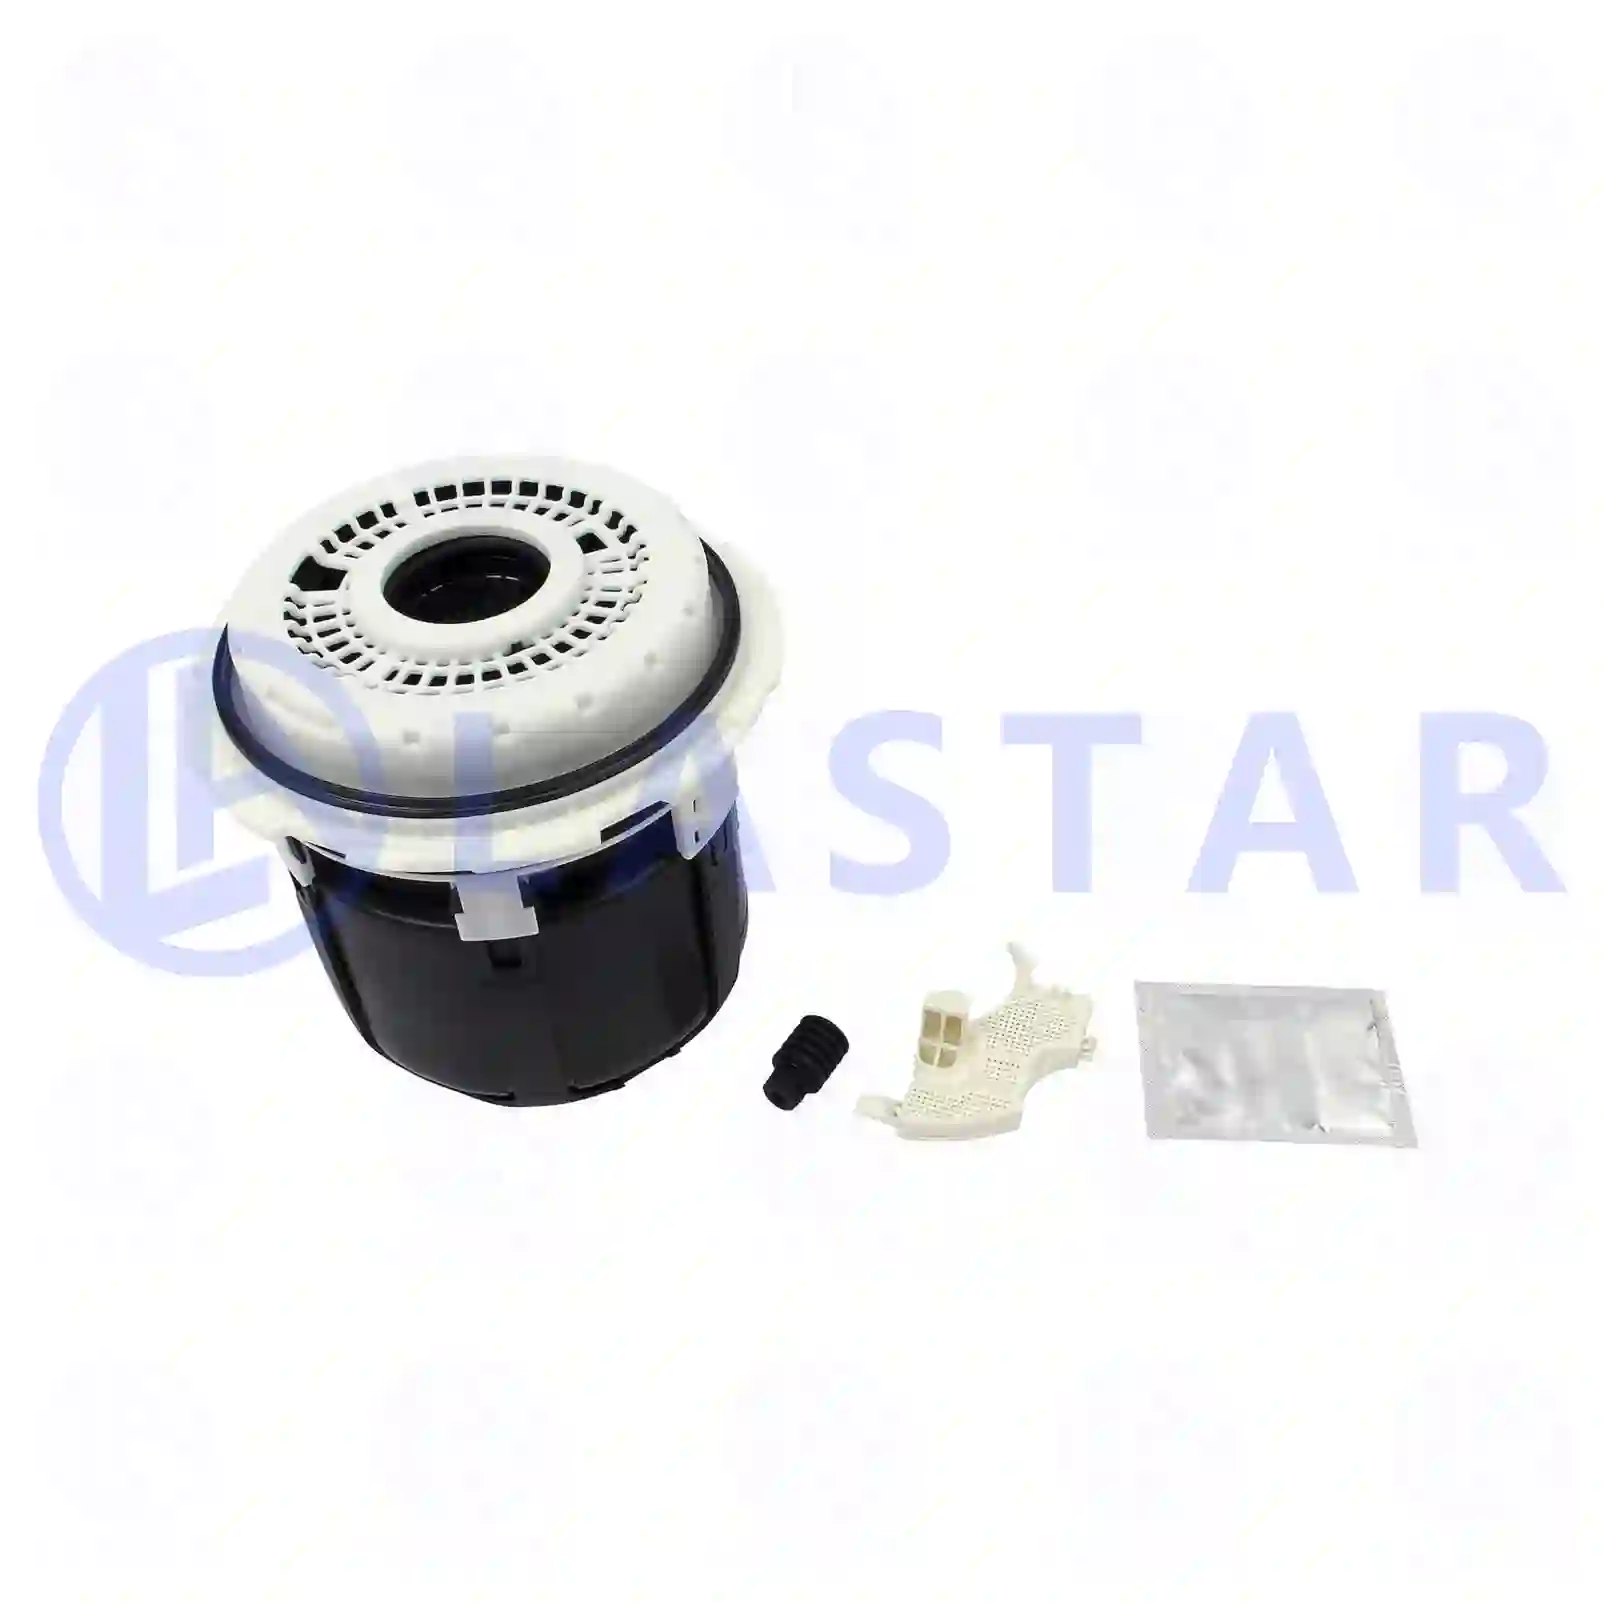 Air dryer kit, with coalescence filtration, 77713963, 21412848, 22223804, 23260134, ZG50065-0008 ||  77713963 Lastar Spare Part | Truck Spare Parts, Auotomotive Spare Parts Air dryer kit, with coalescence filtration, 77713963, 21412848, 22223804, 23260134, ZG50065-0008 ||  77713963 Lastar Spare Part | Truck Spare Parts, Auotomotive Spare Parts